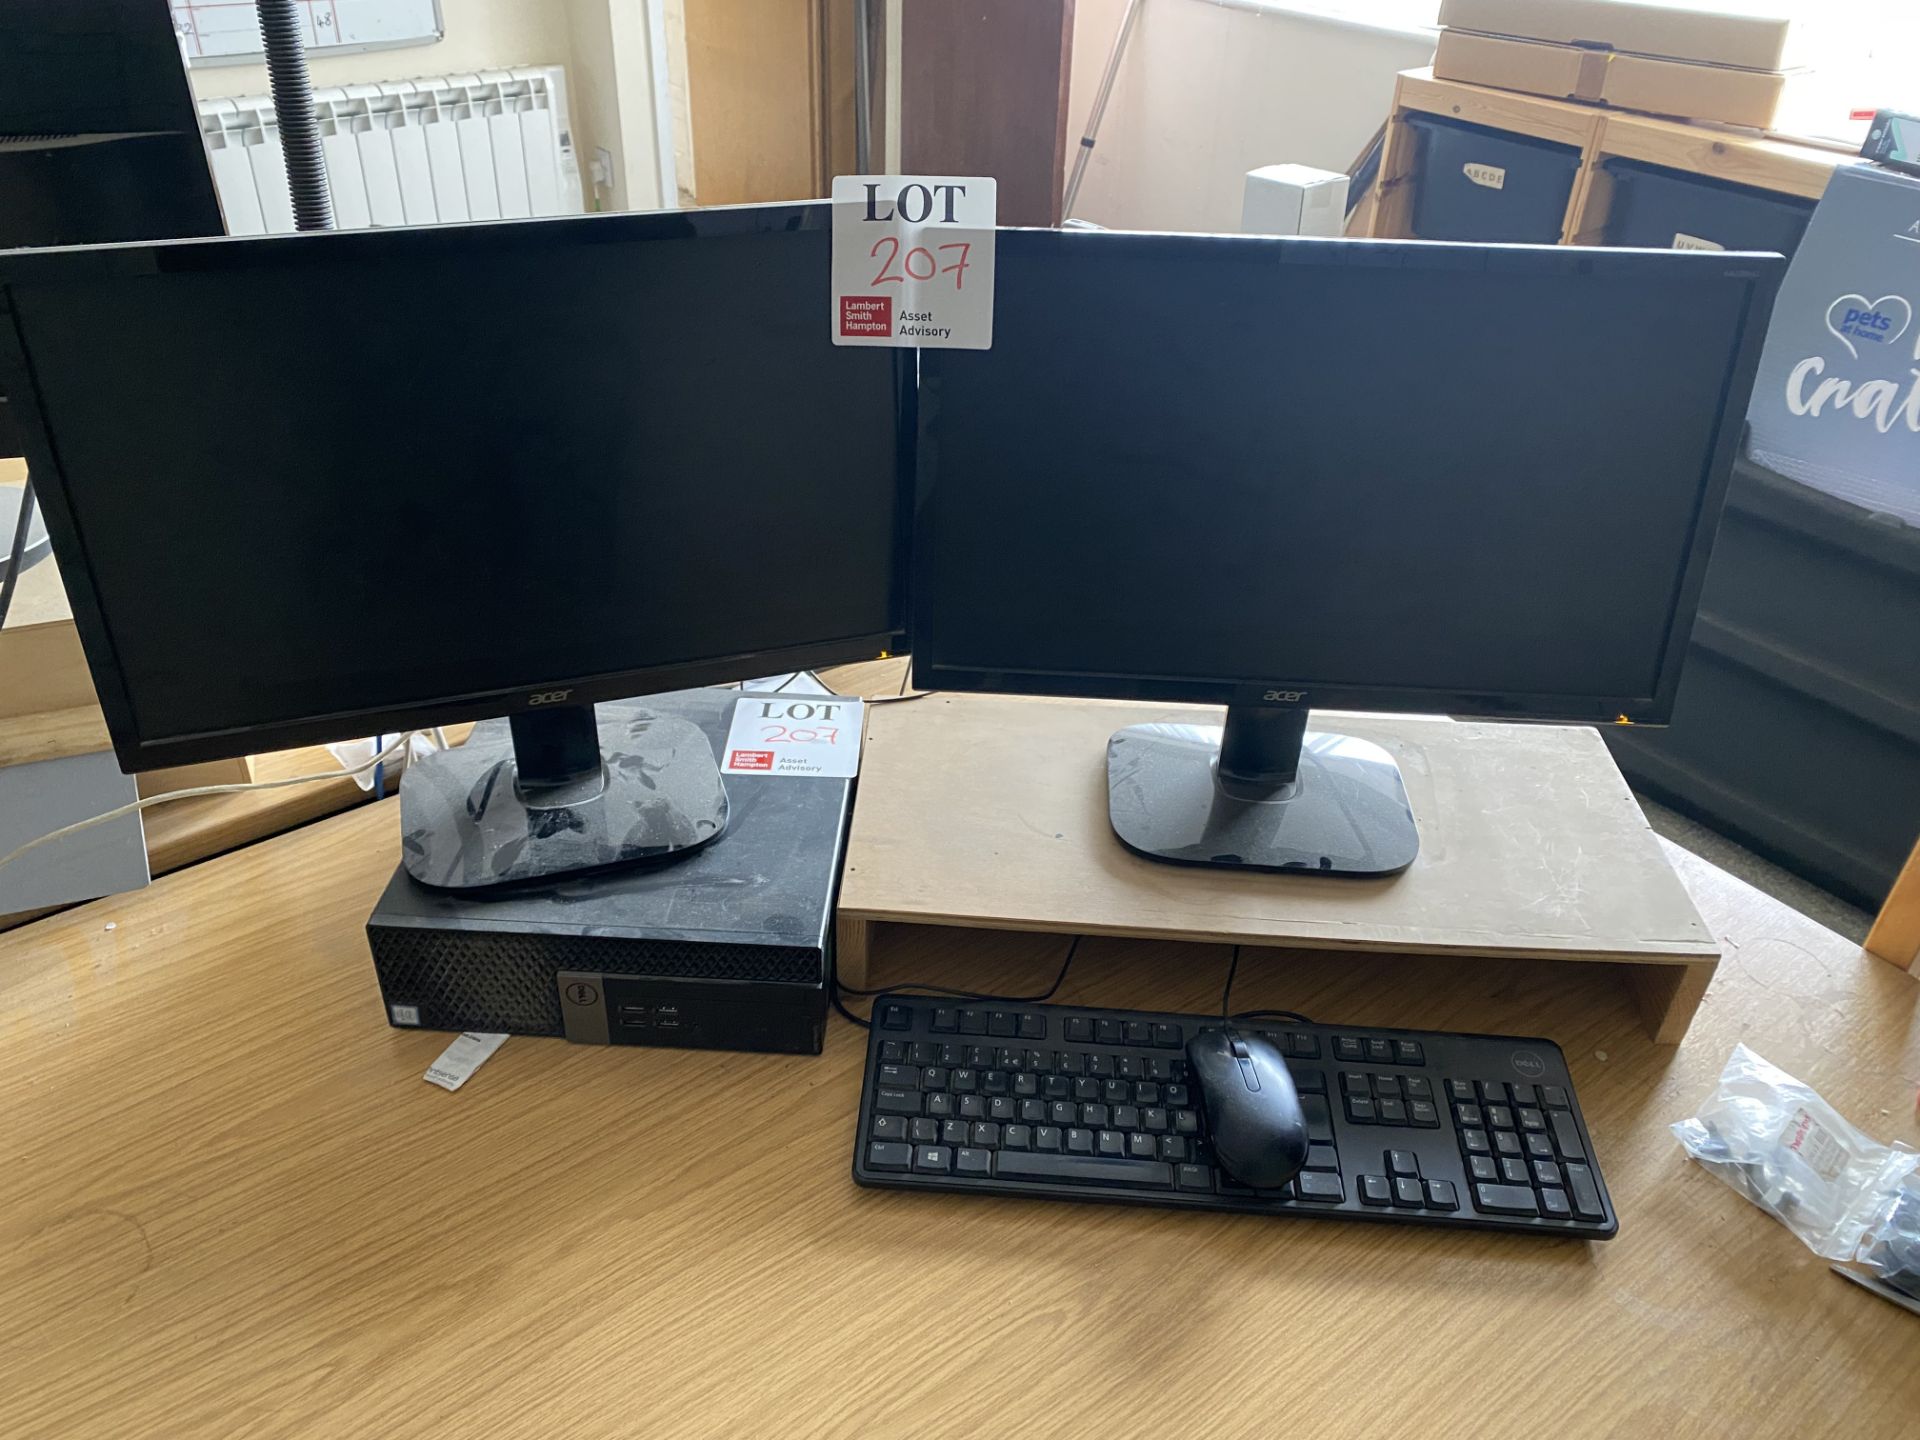 Two Acer desktop monitors, one Dell Optiplex 3040 computer with keyboard & mouse